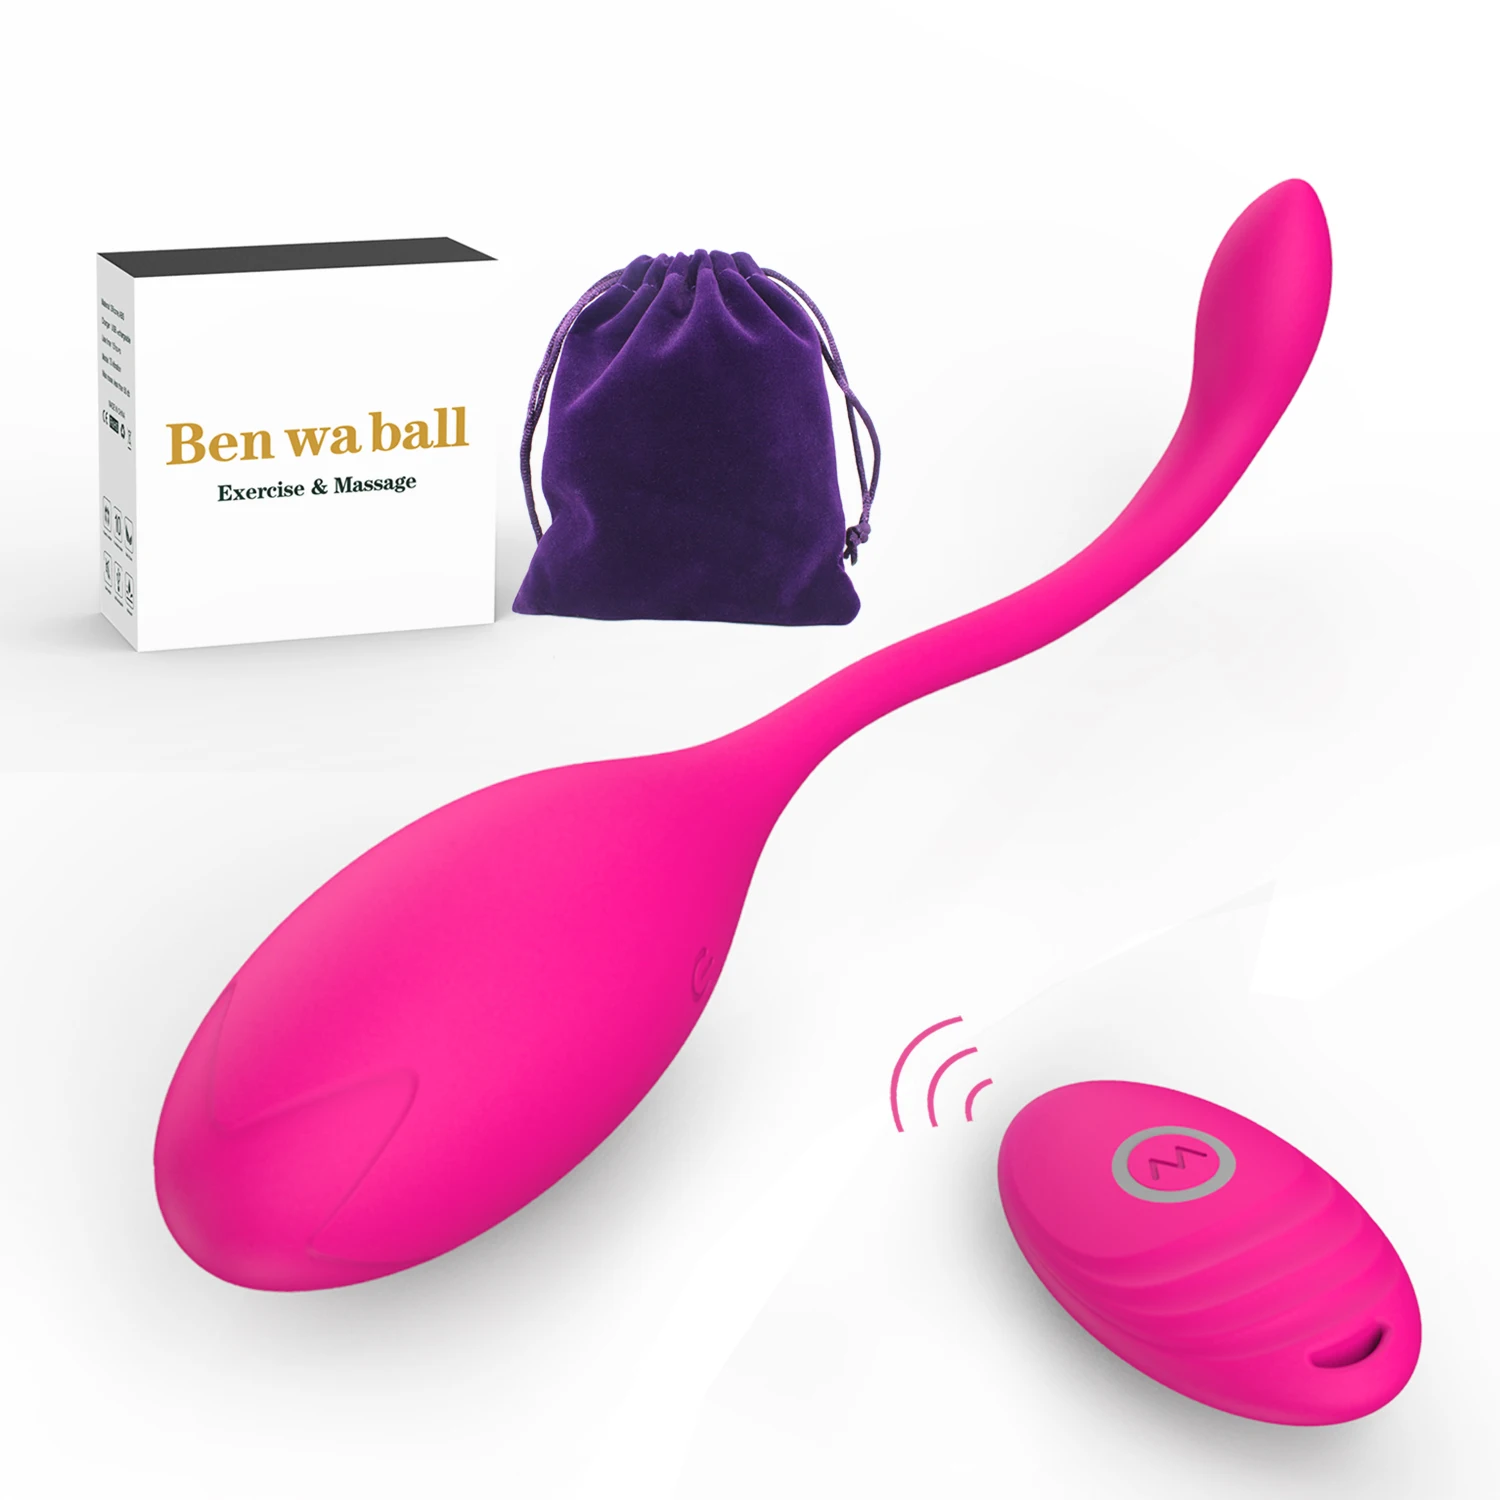 Source Mini Massager Wireless Remote Vibrator For Husband and Wife Sex Toy on m.alibaba